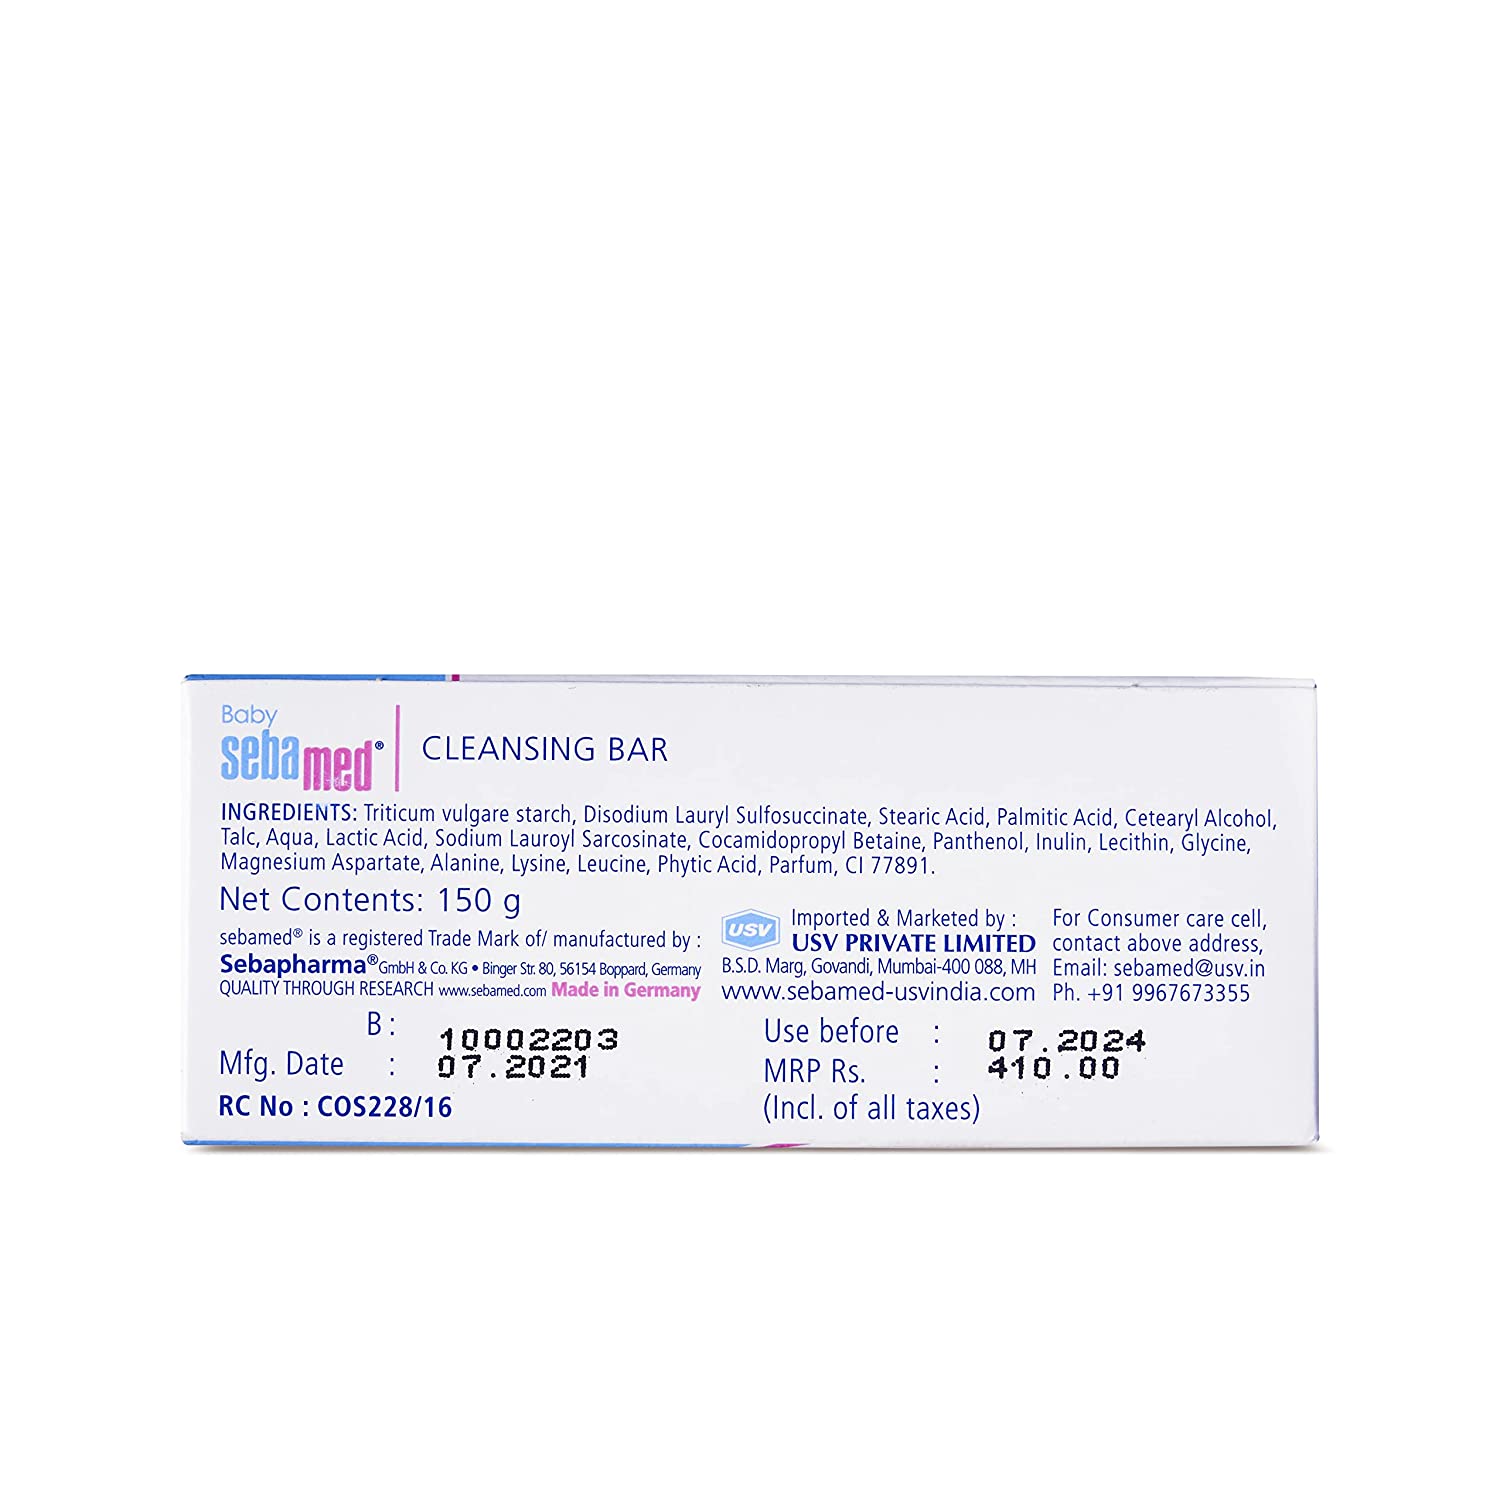 Sebamed Baby Cleansing Bar 150g|Ph 5.5 | With Panthenol|No tears & Soap Free bar| For Delicate skin